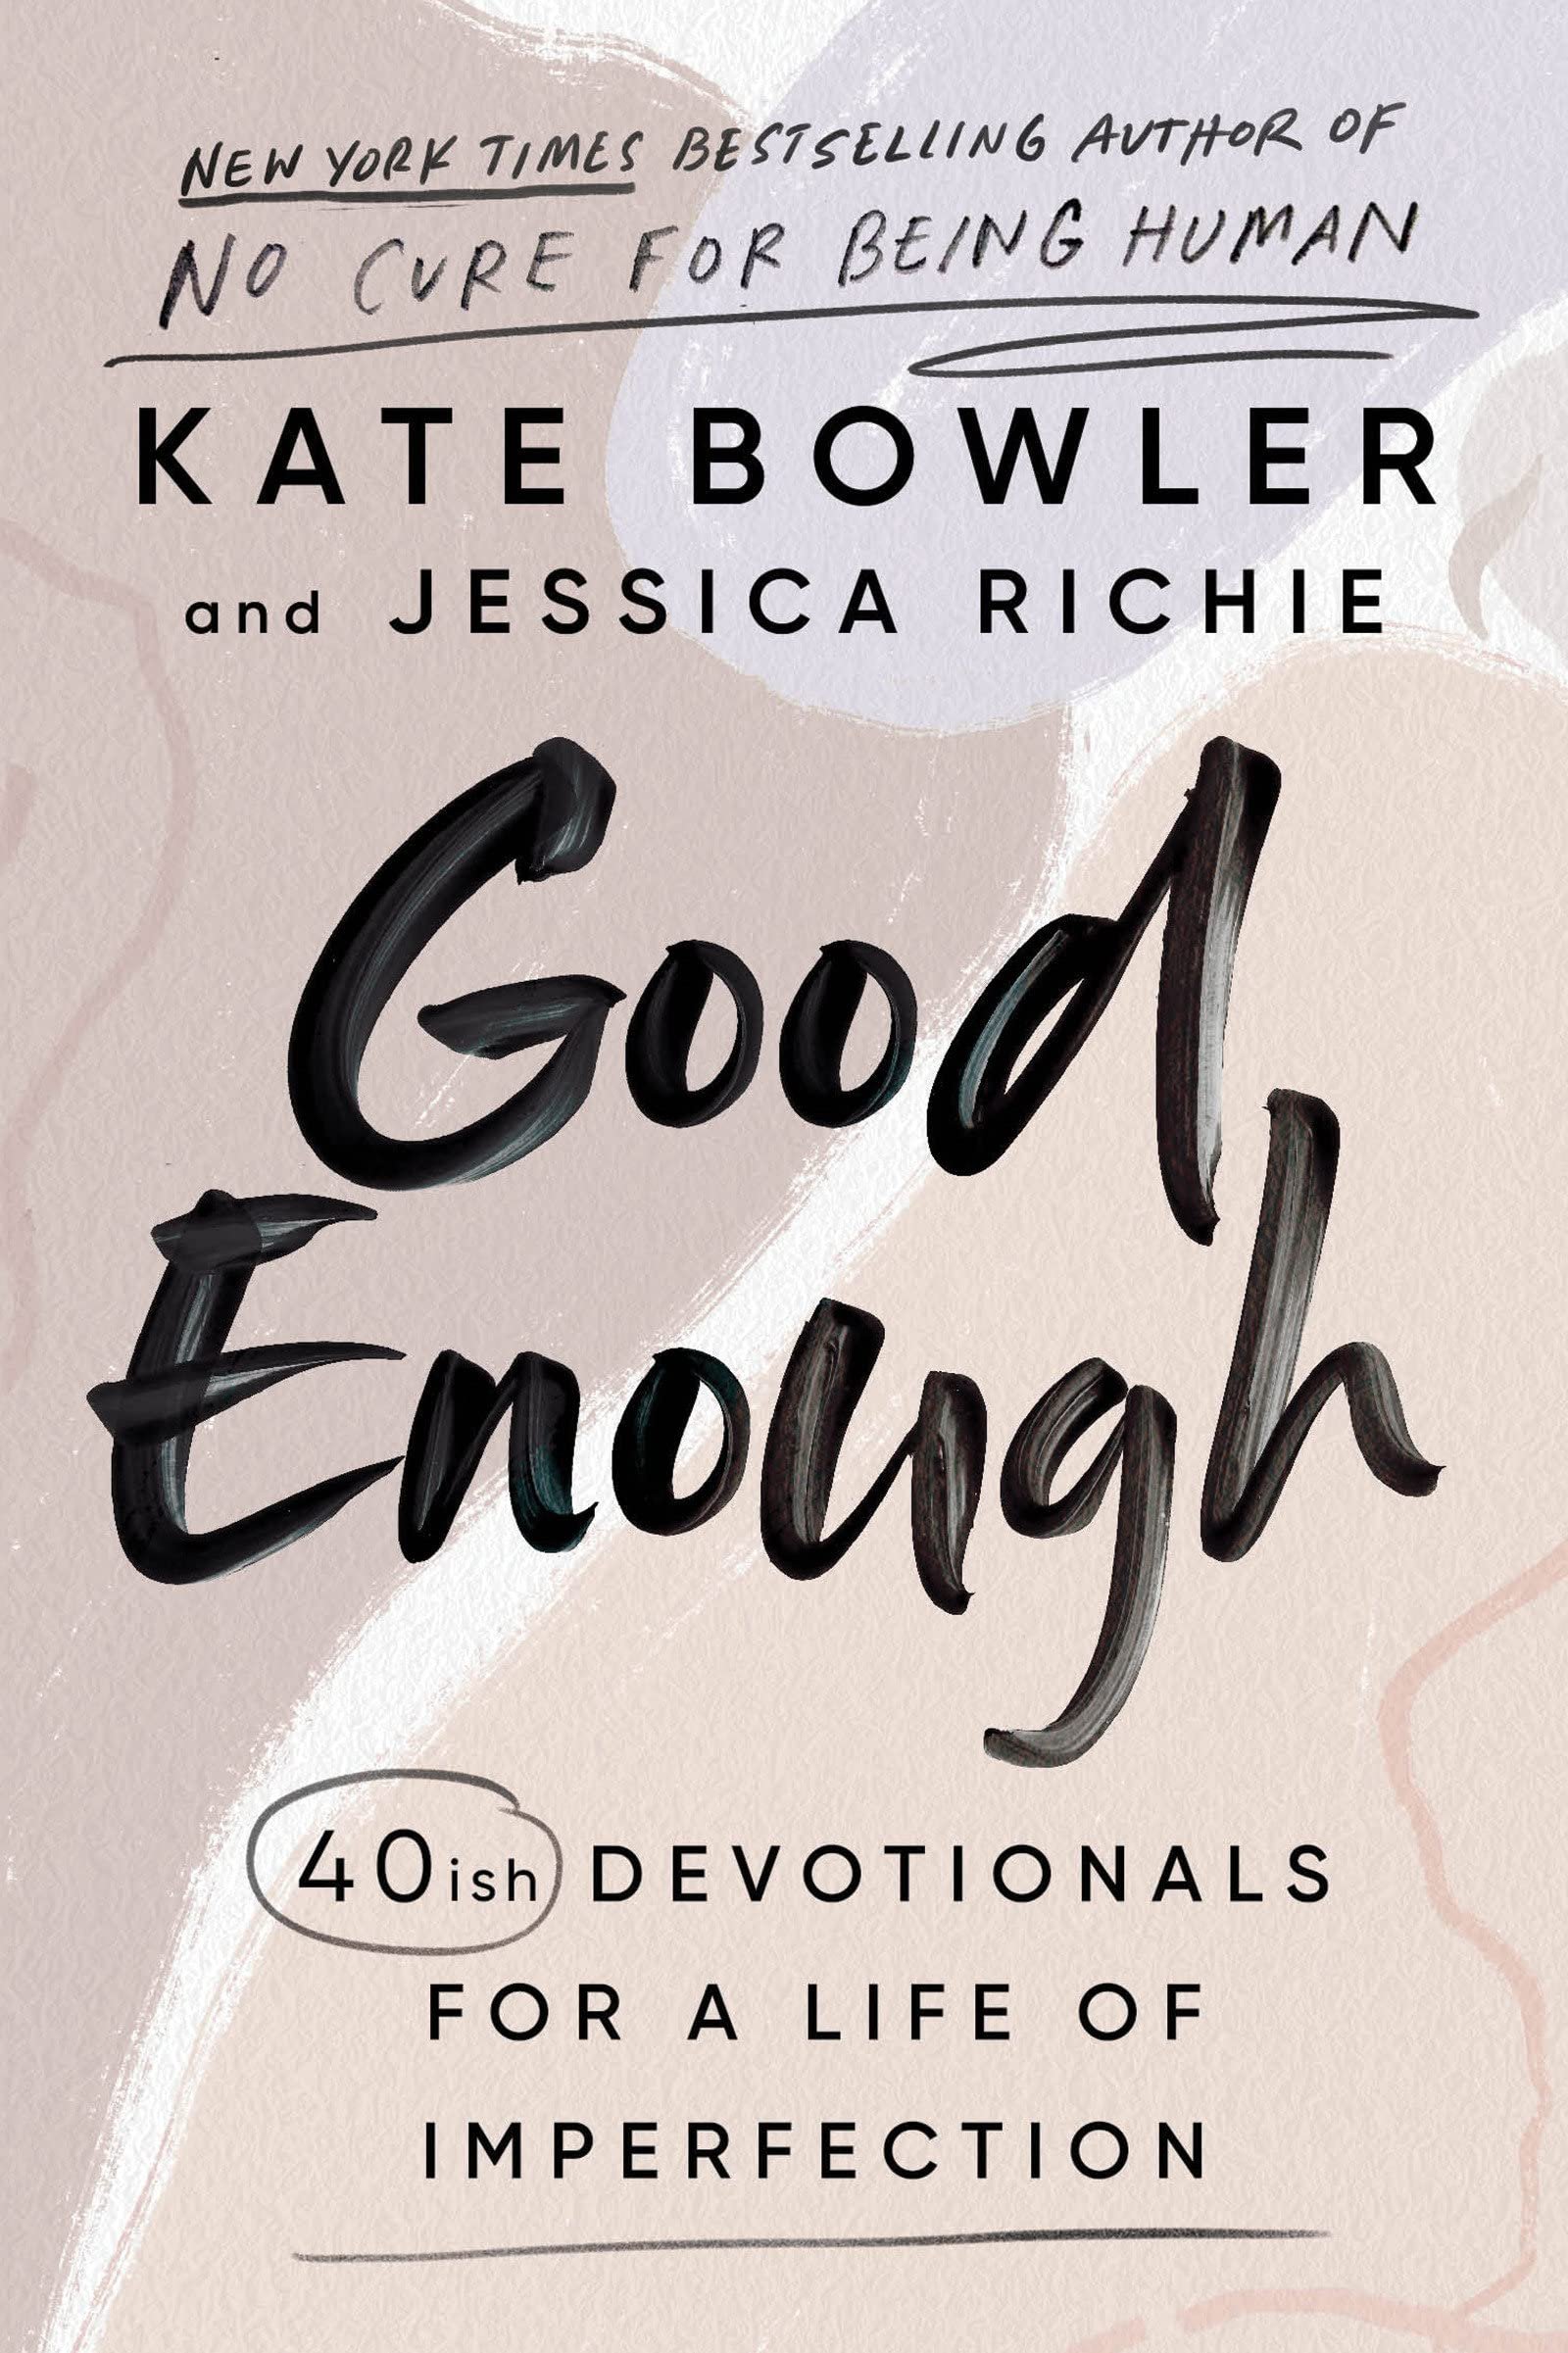 Good Enough: 40ish Devotionals for a Life of Imperfection, Kate Bowler